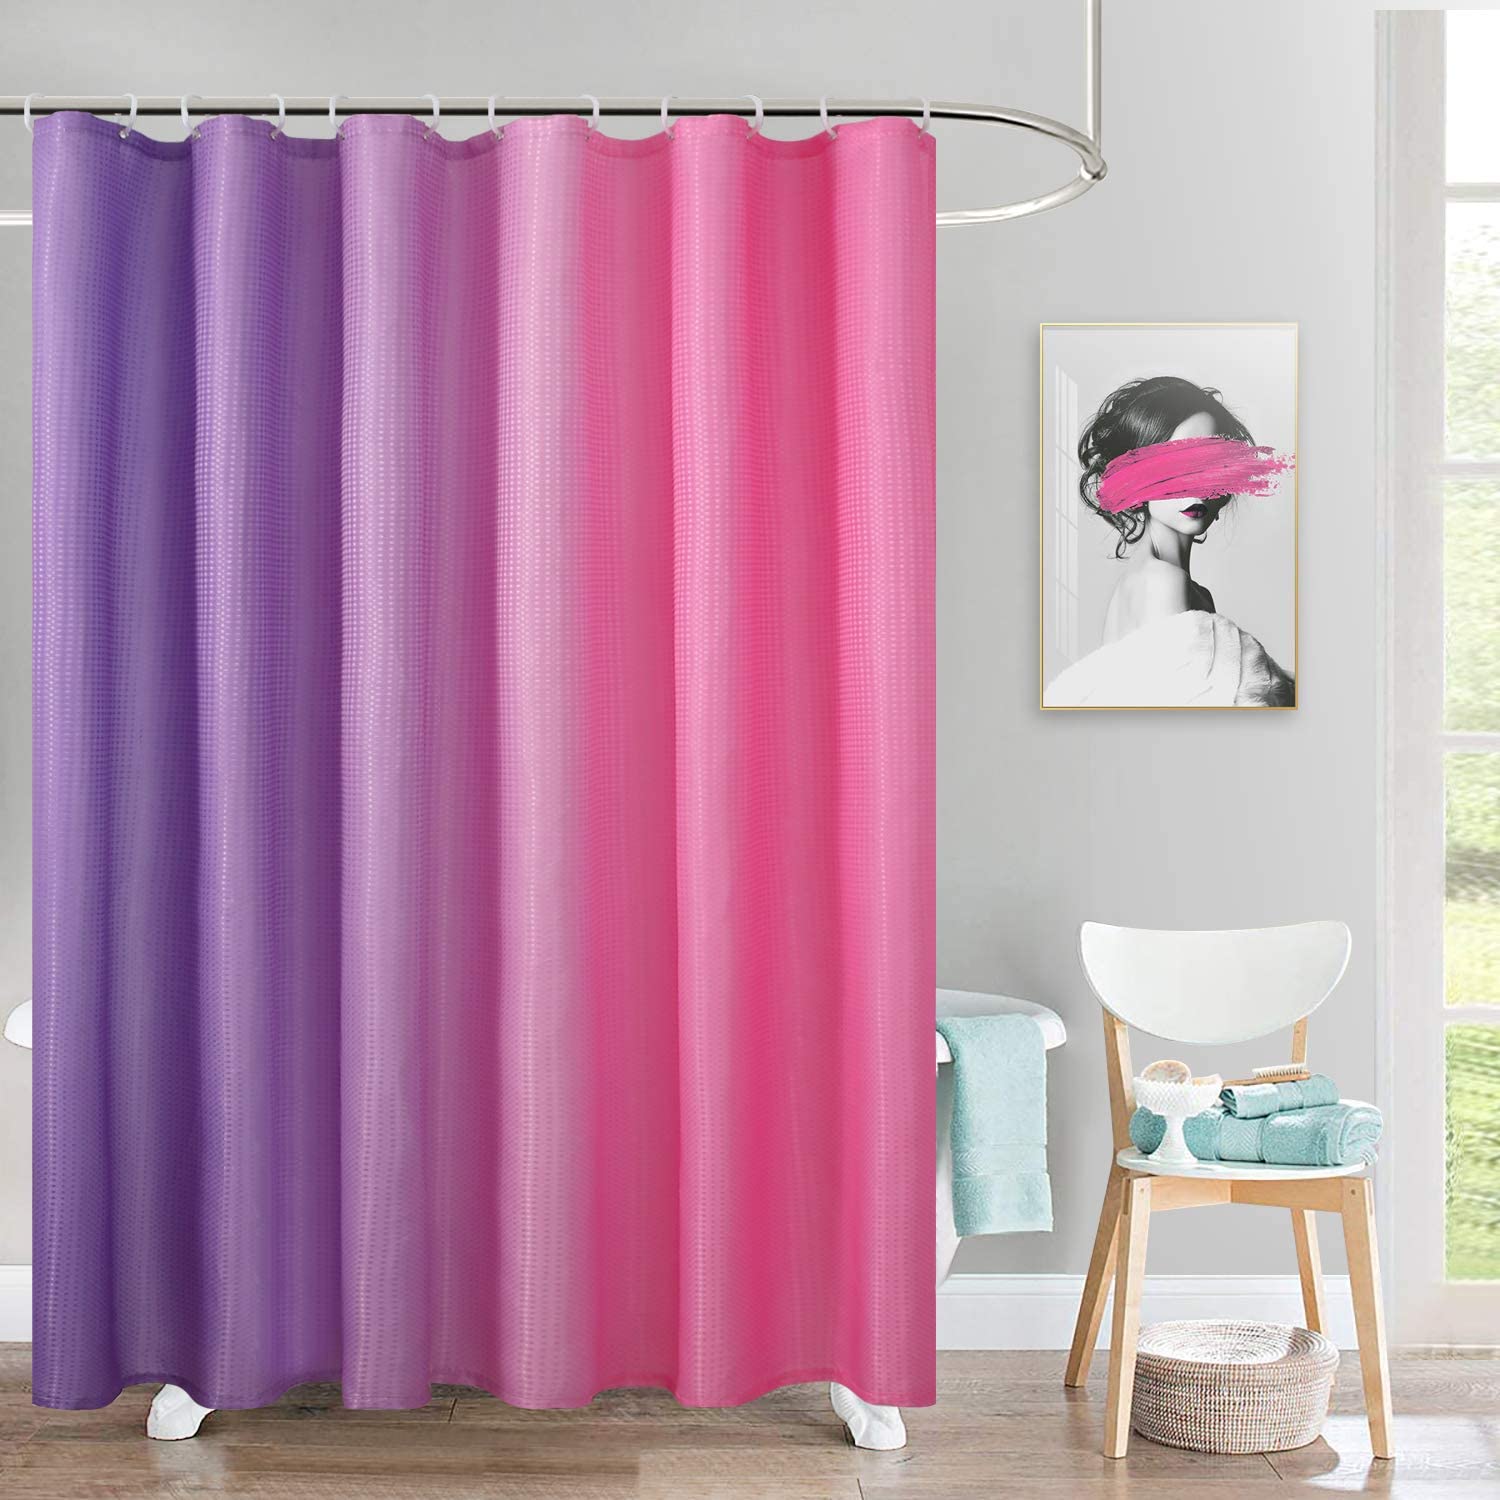 Fabric Waffle Weave Details about   BGment Ombre Fabric Shower Curtain for Bathroom Decorations 